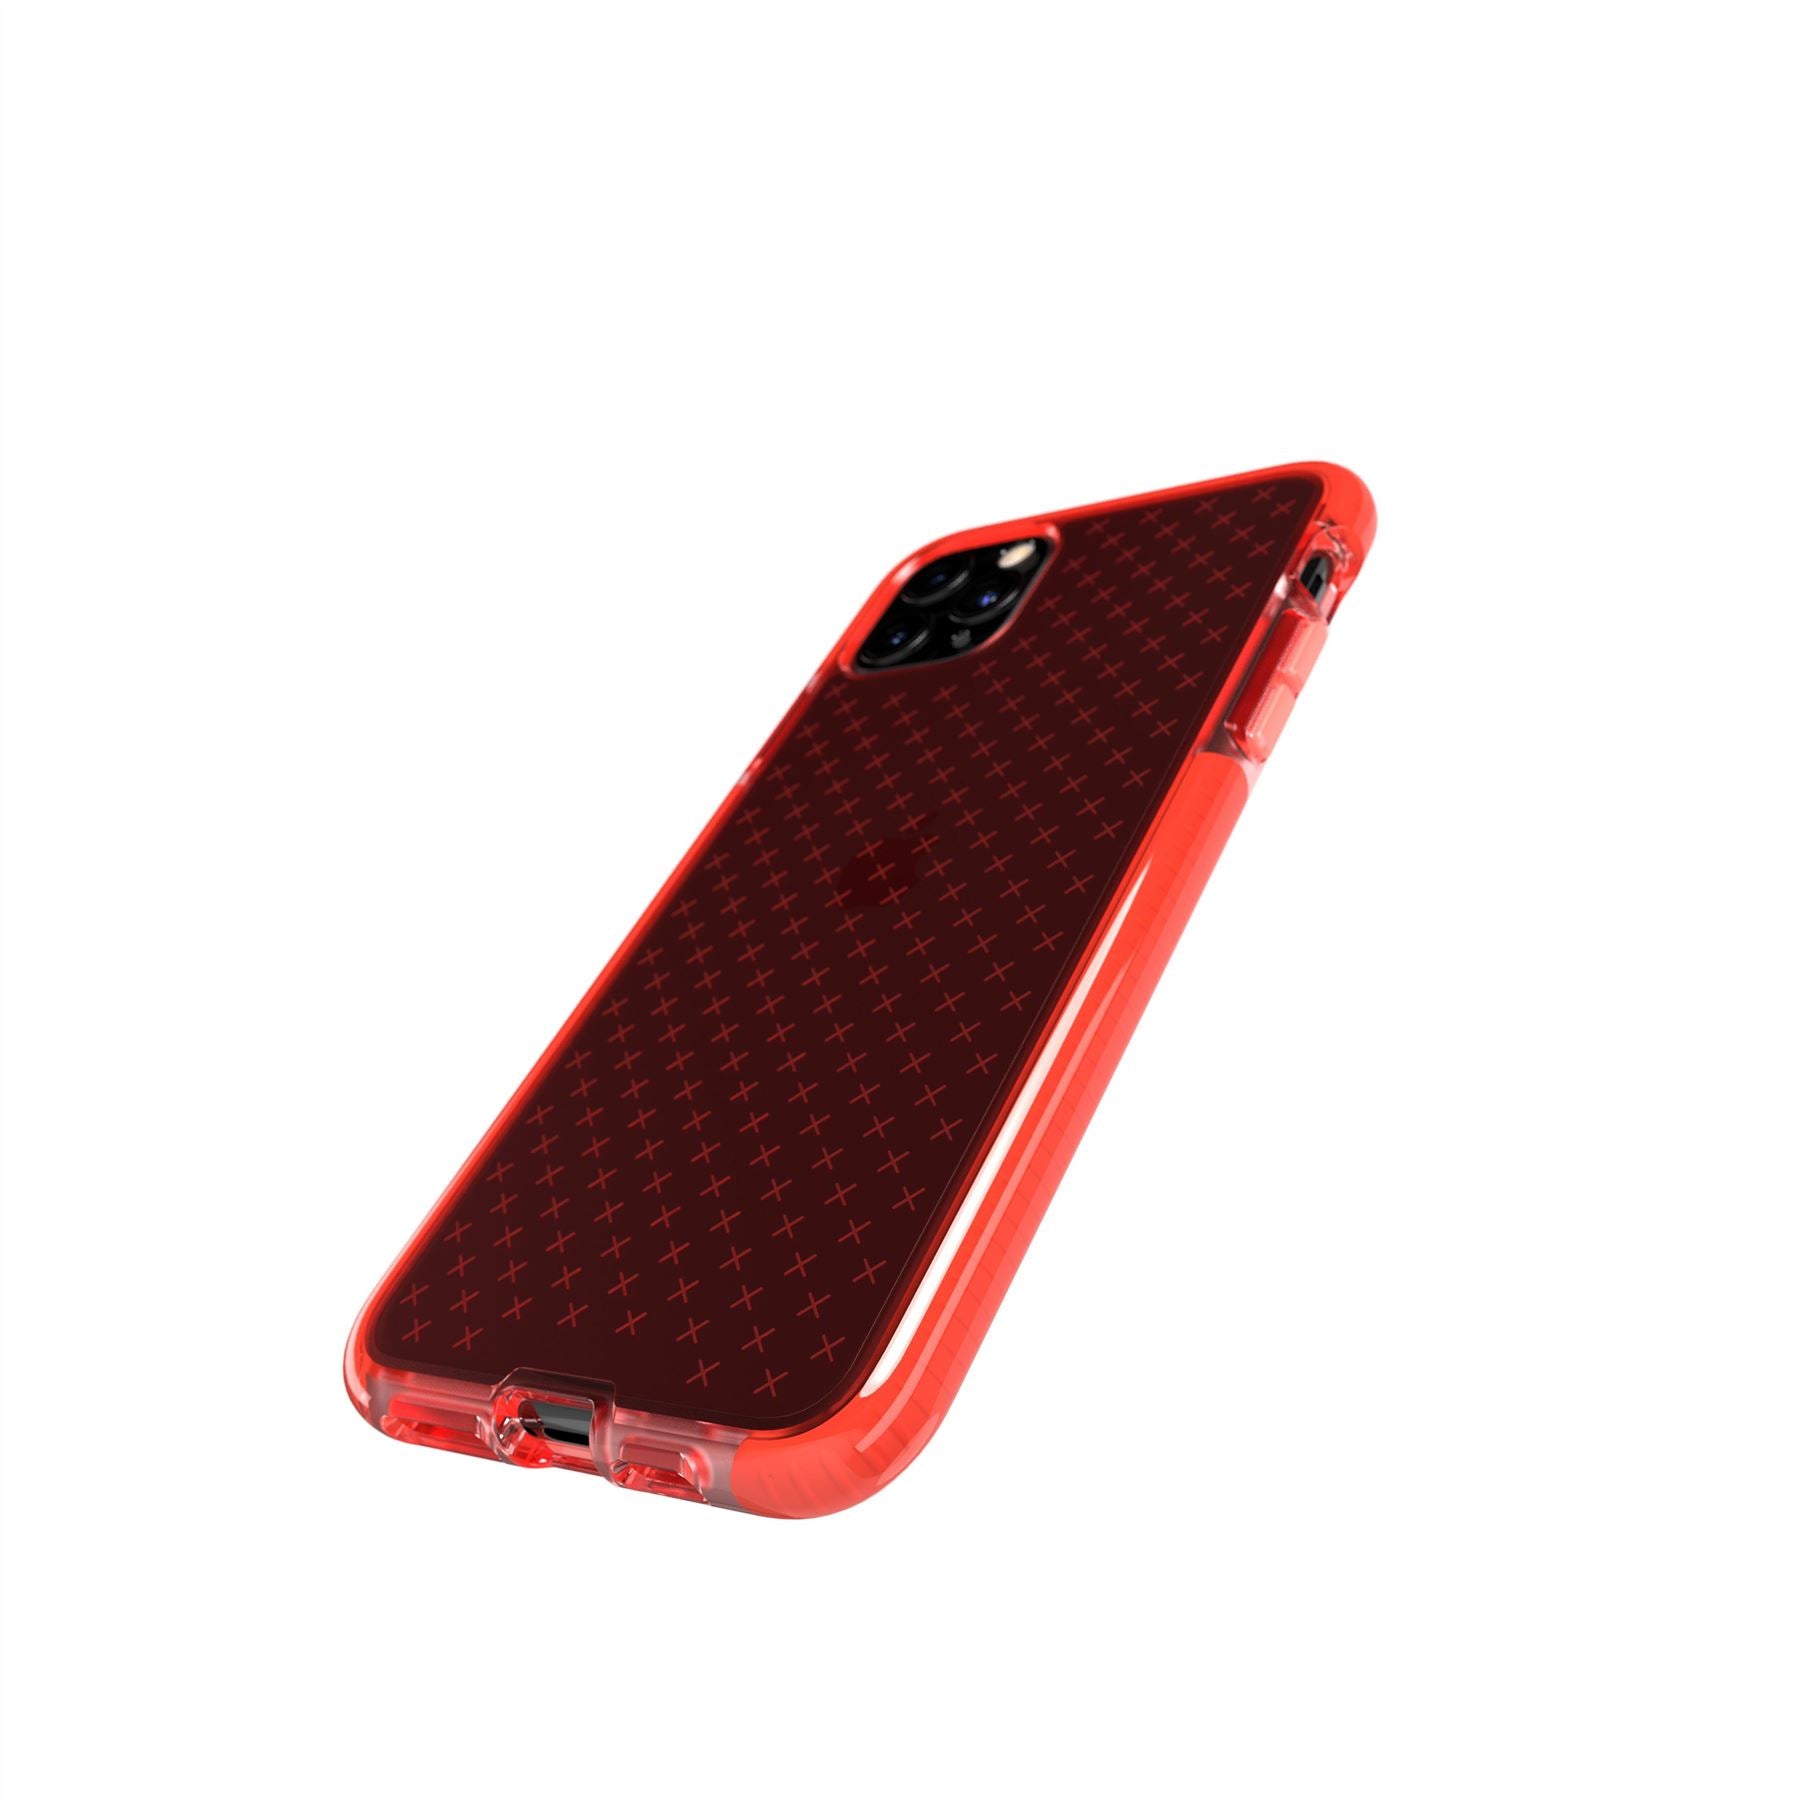 iPhone 11 Pro Max Cases | Tech21 - US